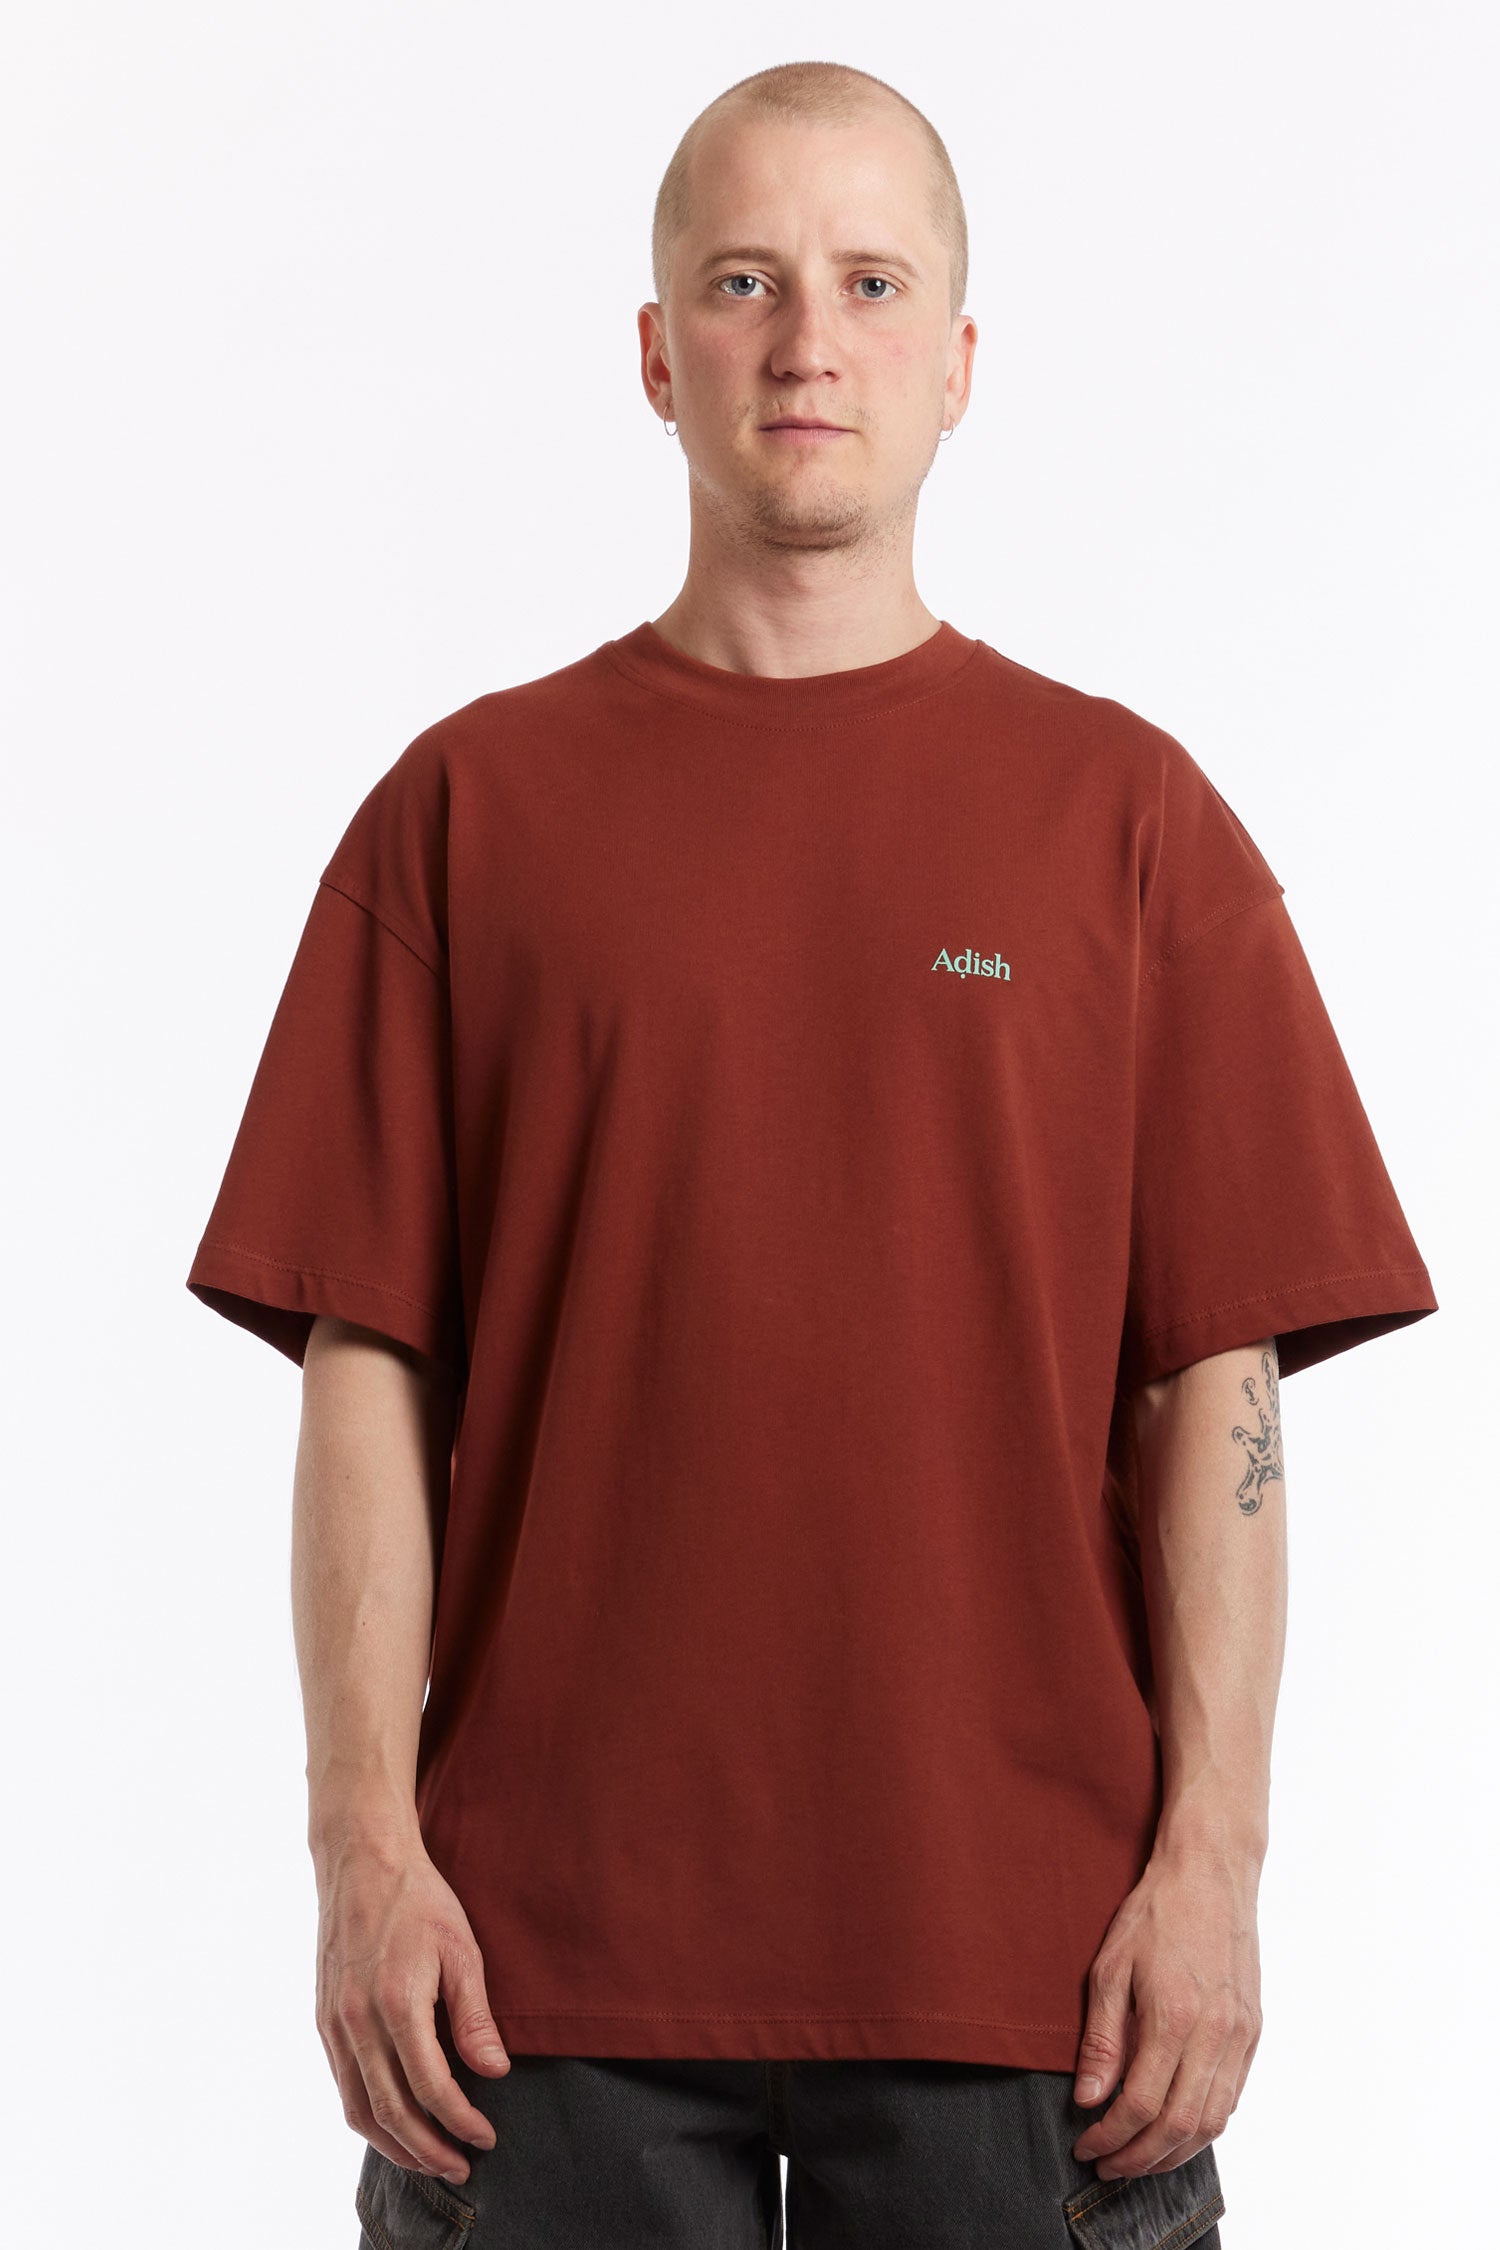 The ADISH - SHORT SLEEVE HEDAB LOGO T-SHIRT  available online with global shipping, and in PAM Stores Melbourne and Sydney.